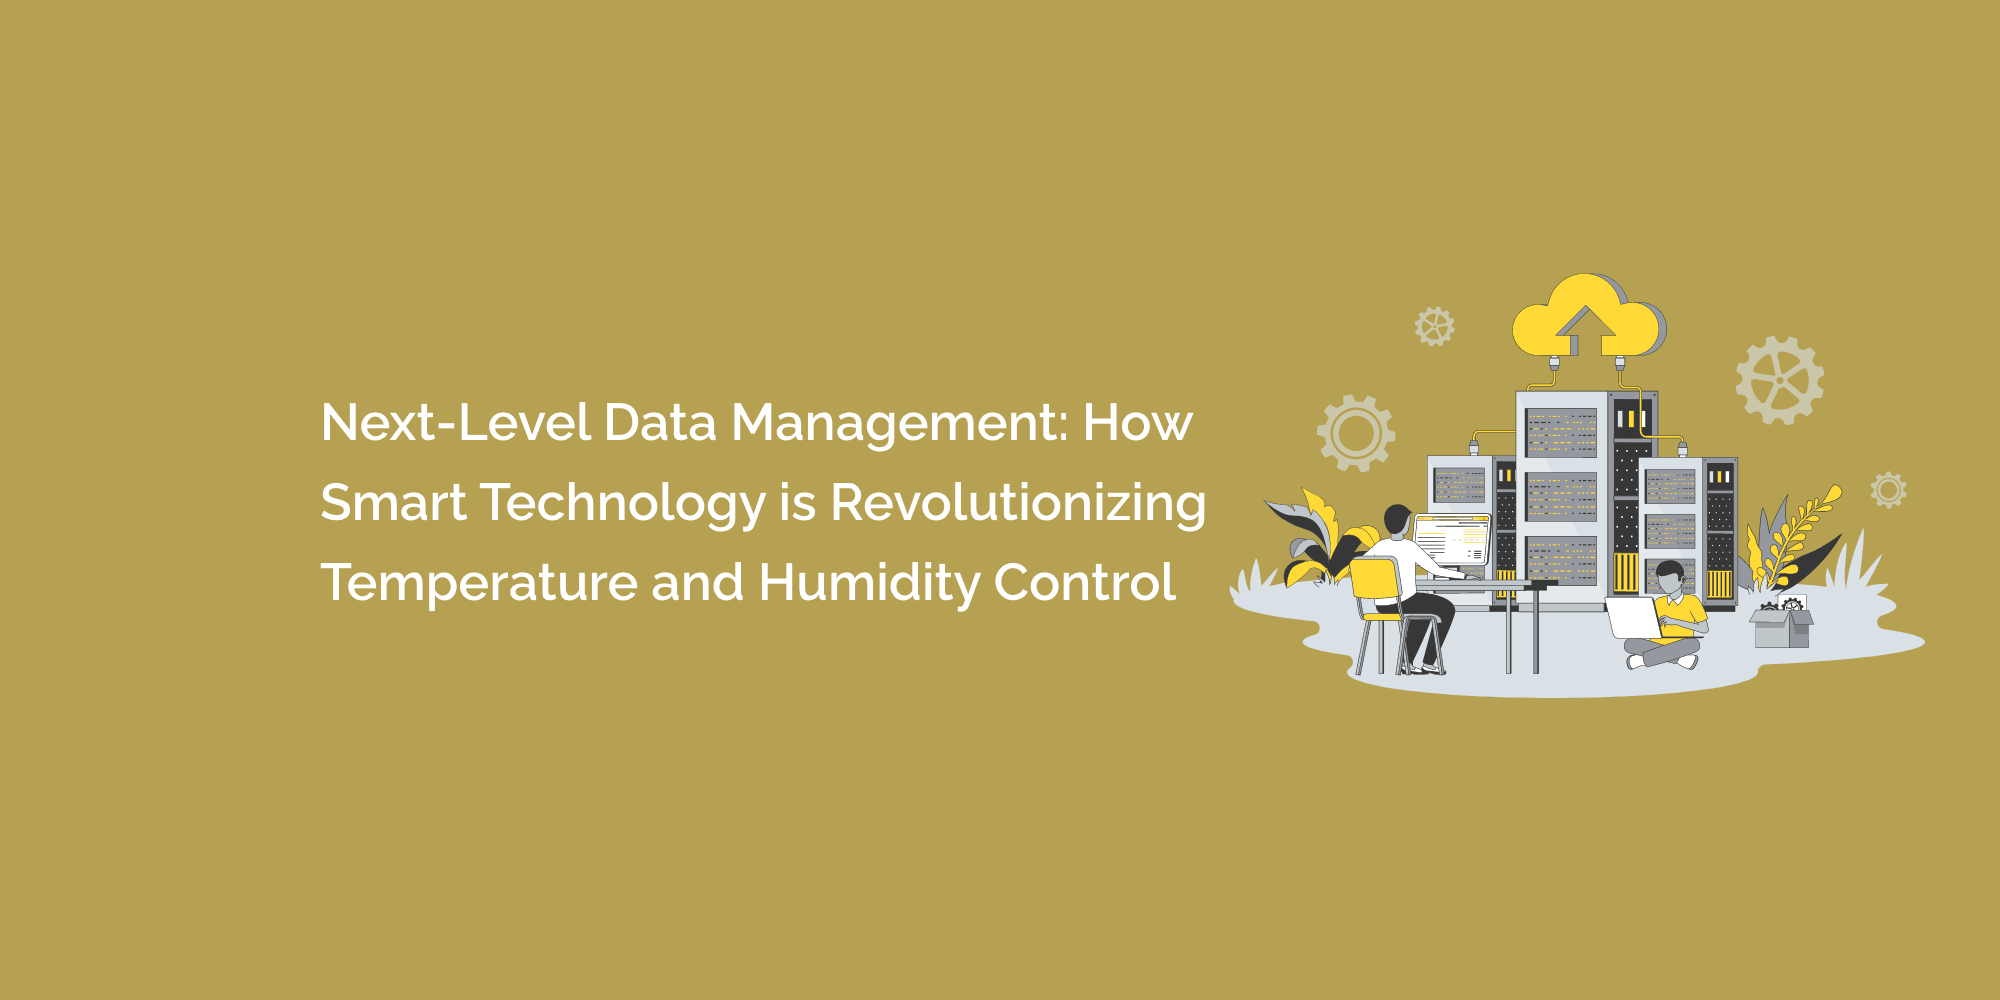 Next-Level Data Management: How Smart Technology is Revolutionizing Temperature and Humidity Control